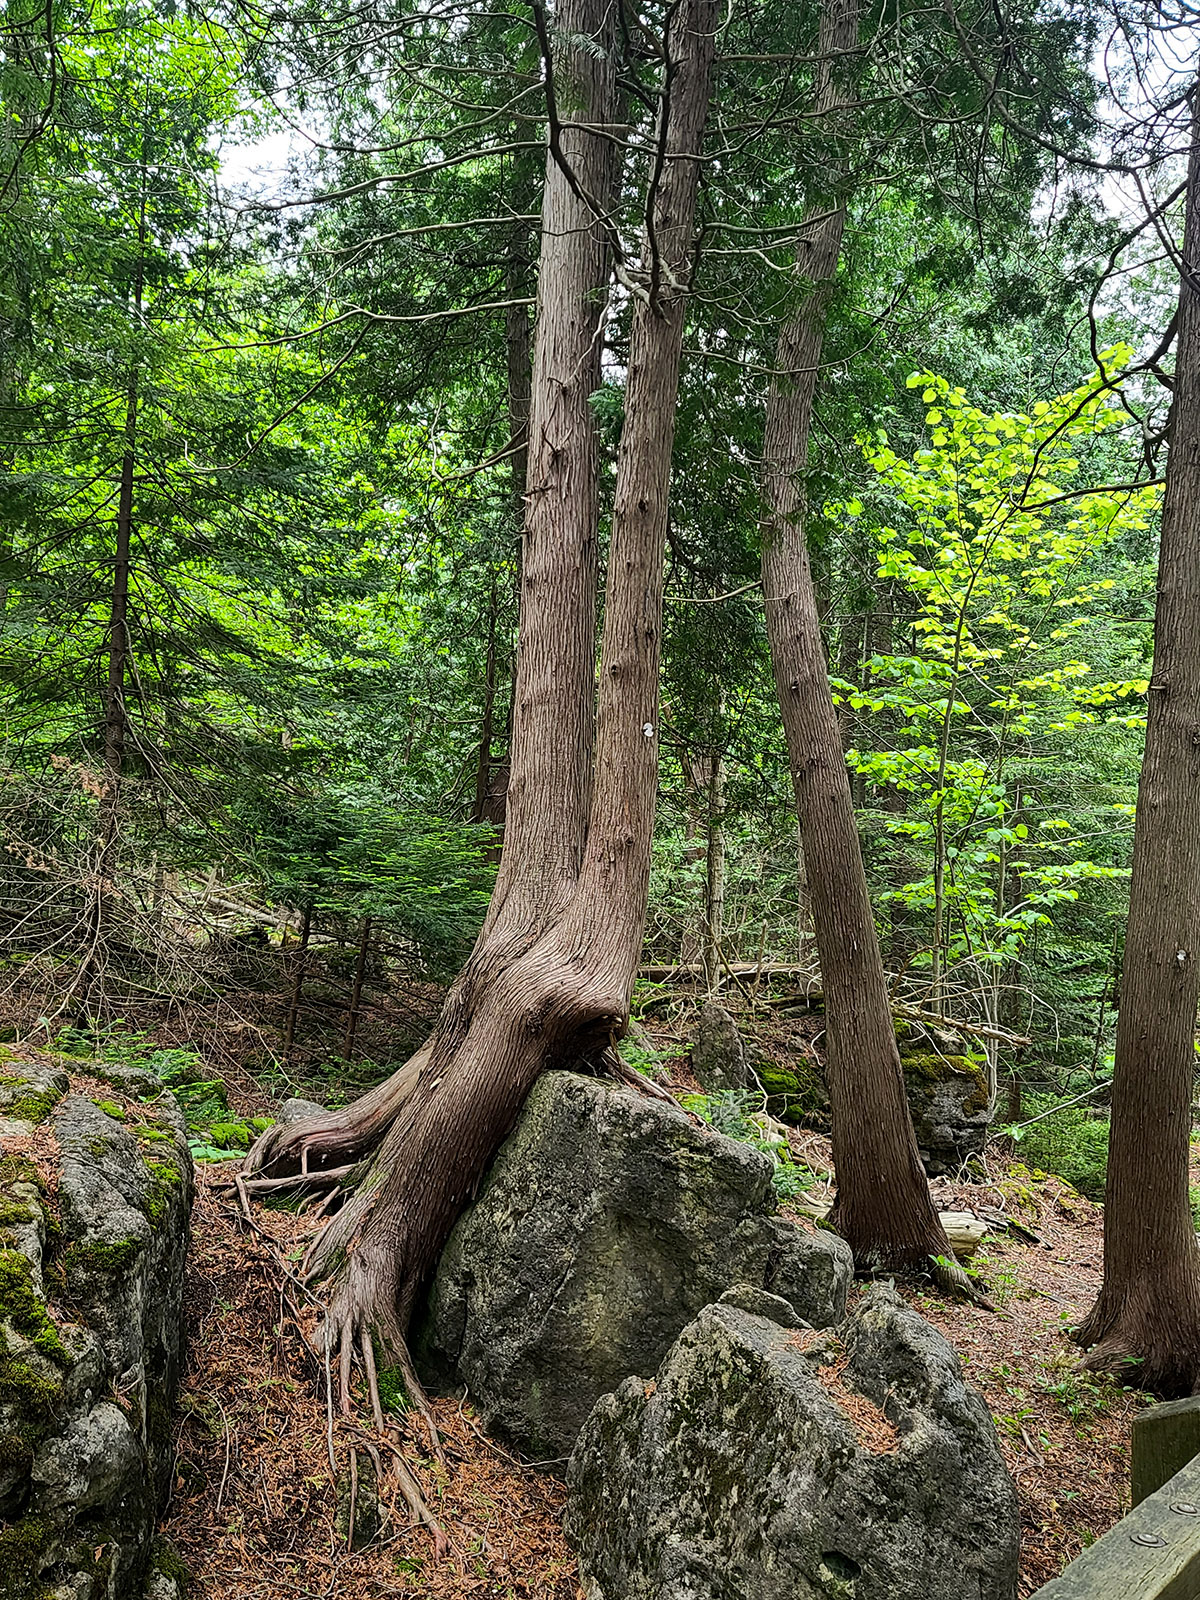 A tree growing over a large boulder.